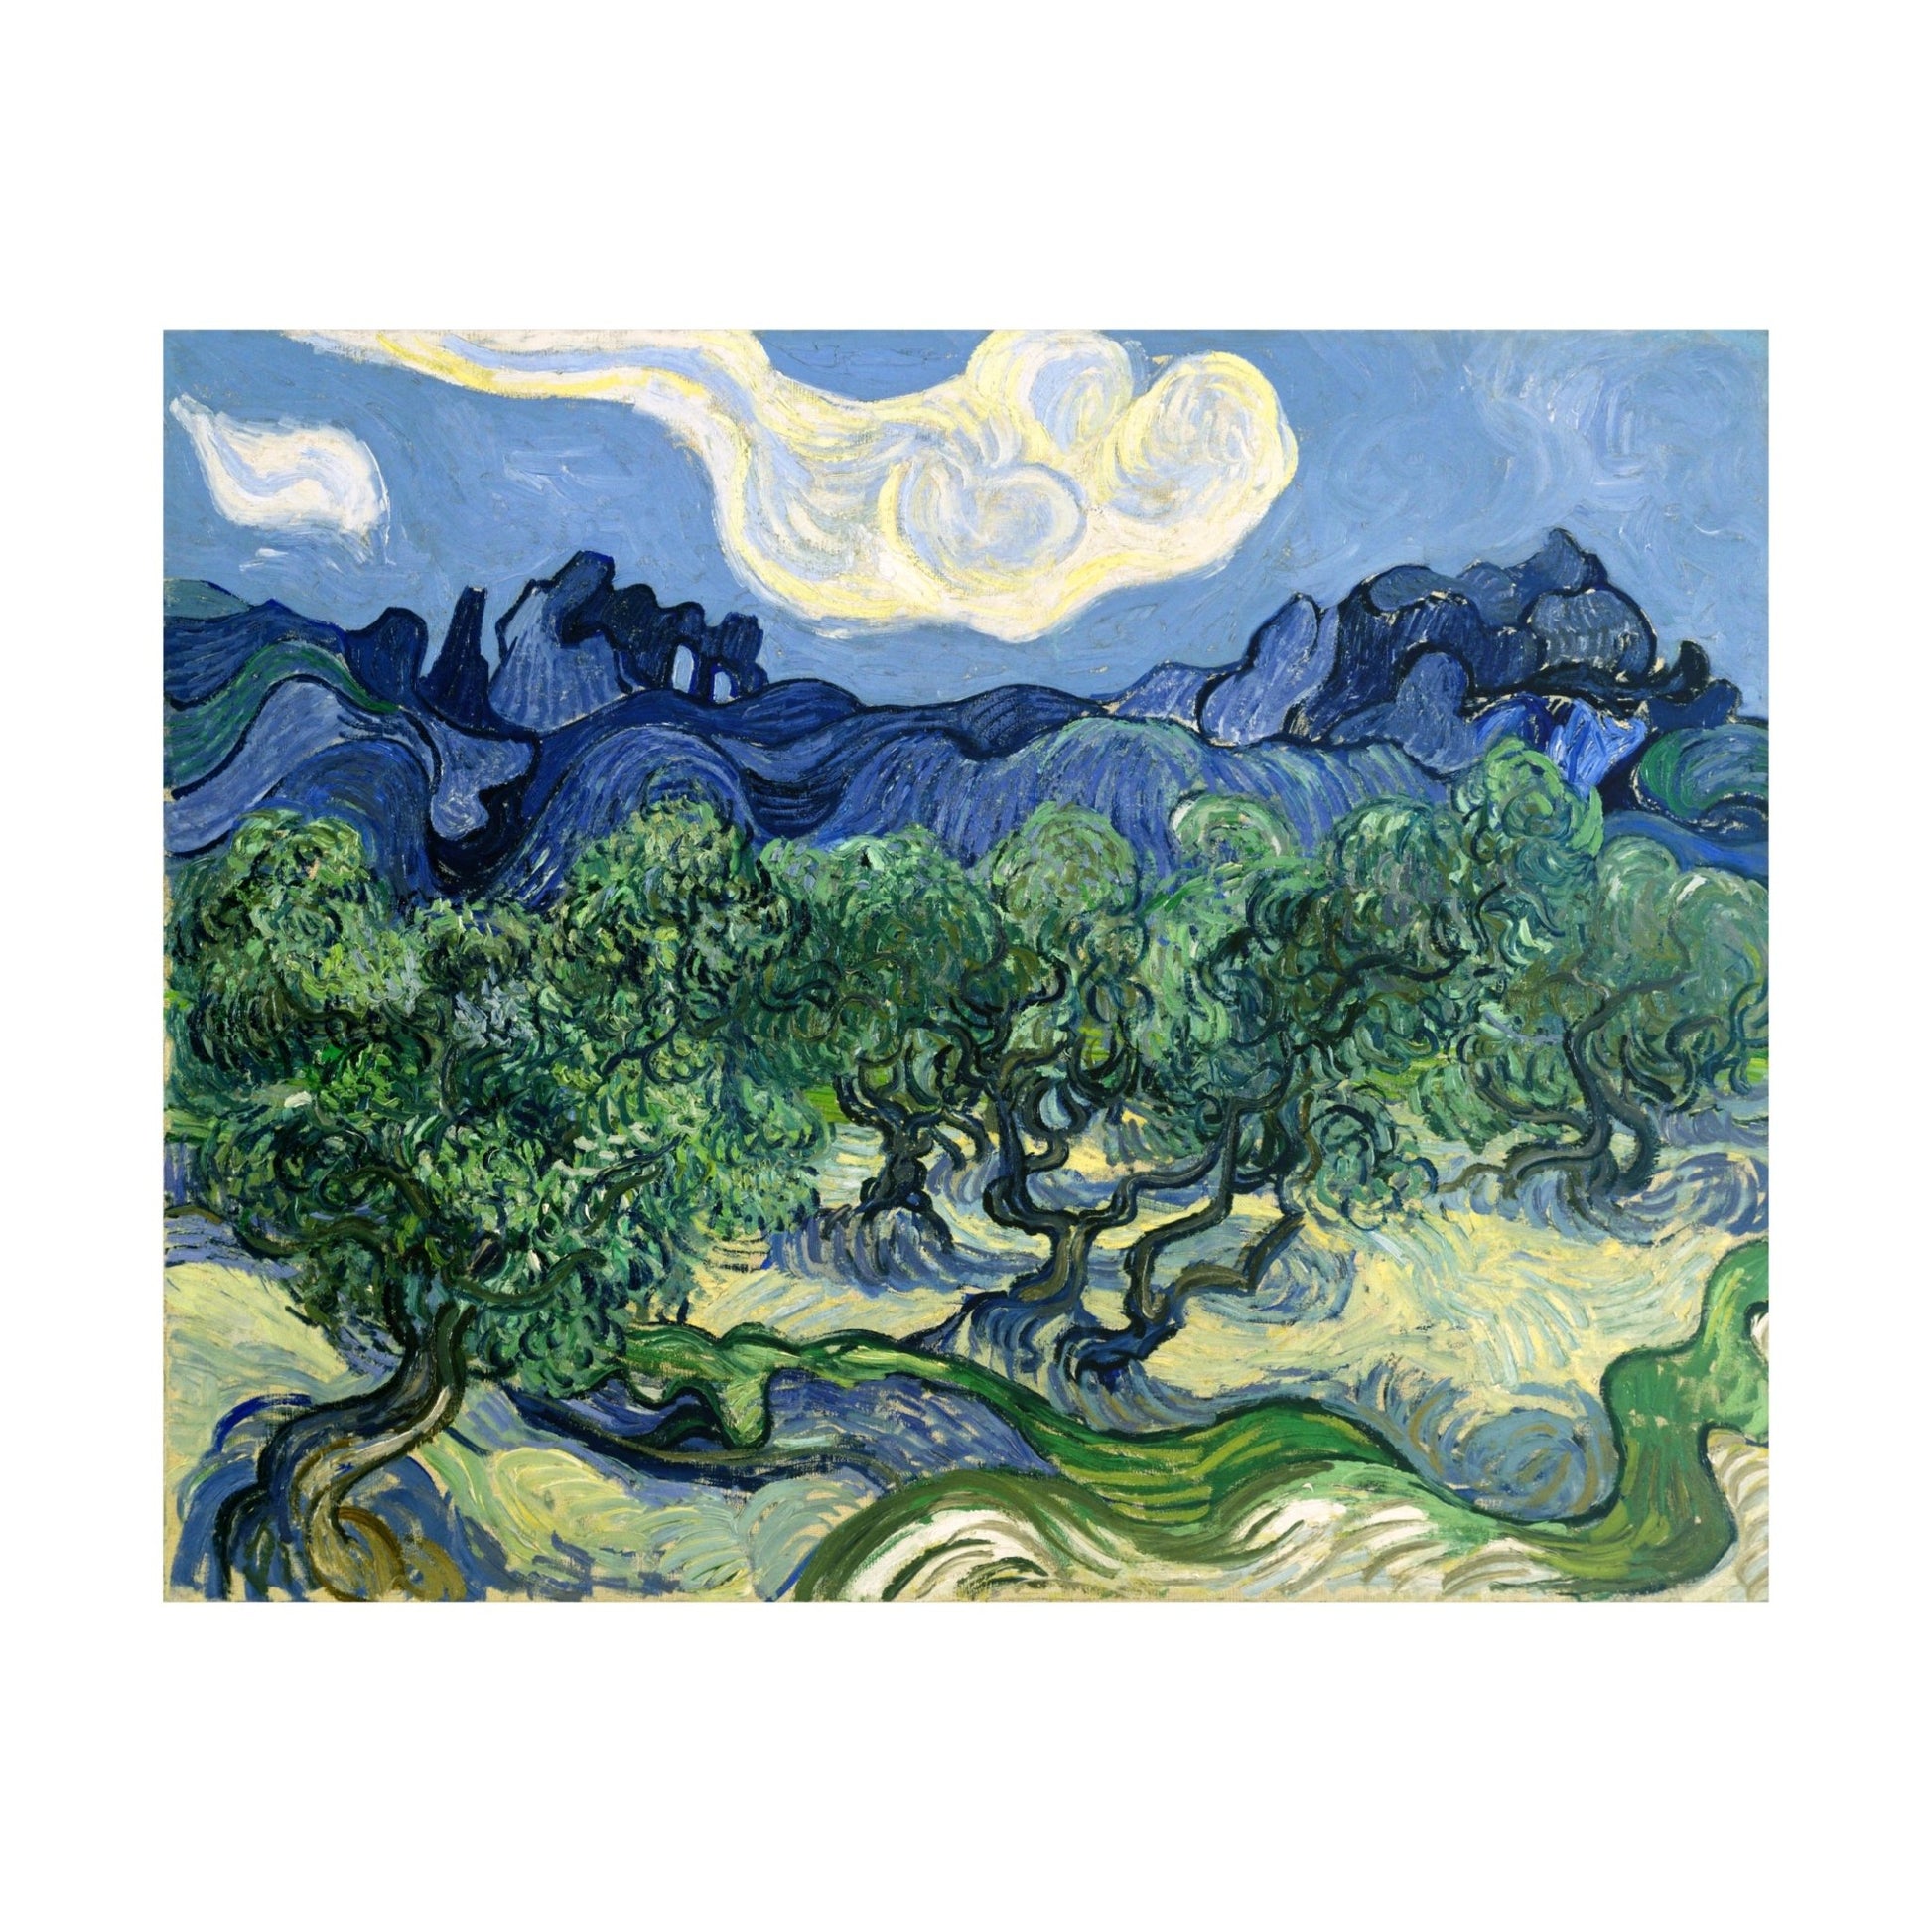 VINCENT VAN GOGH - Olive Trees with the Alpilles in Background - Pathos Studio -